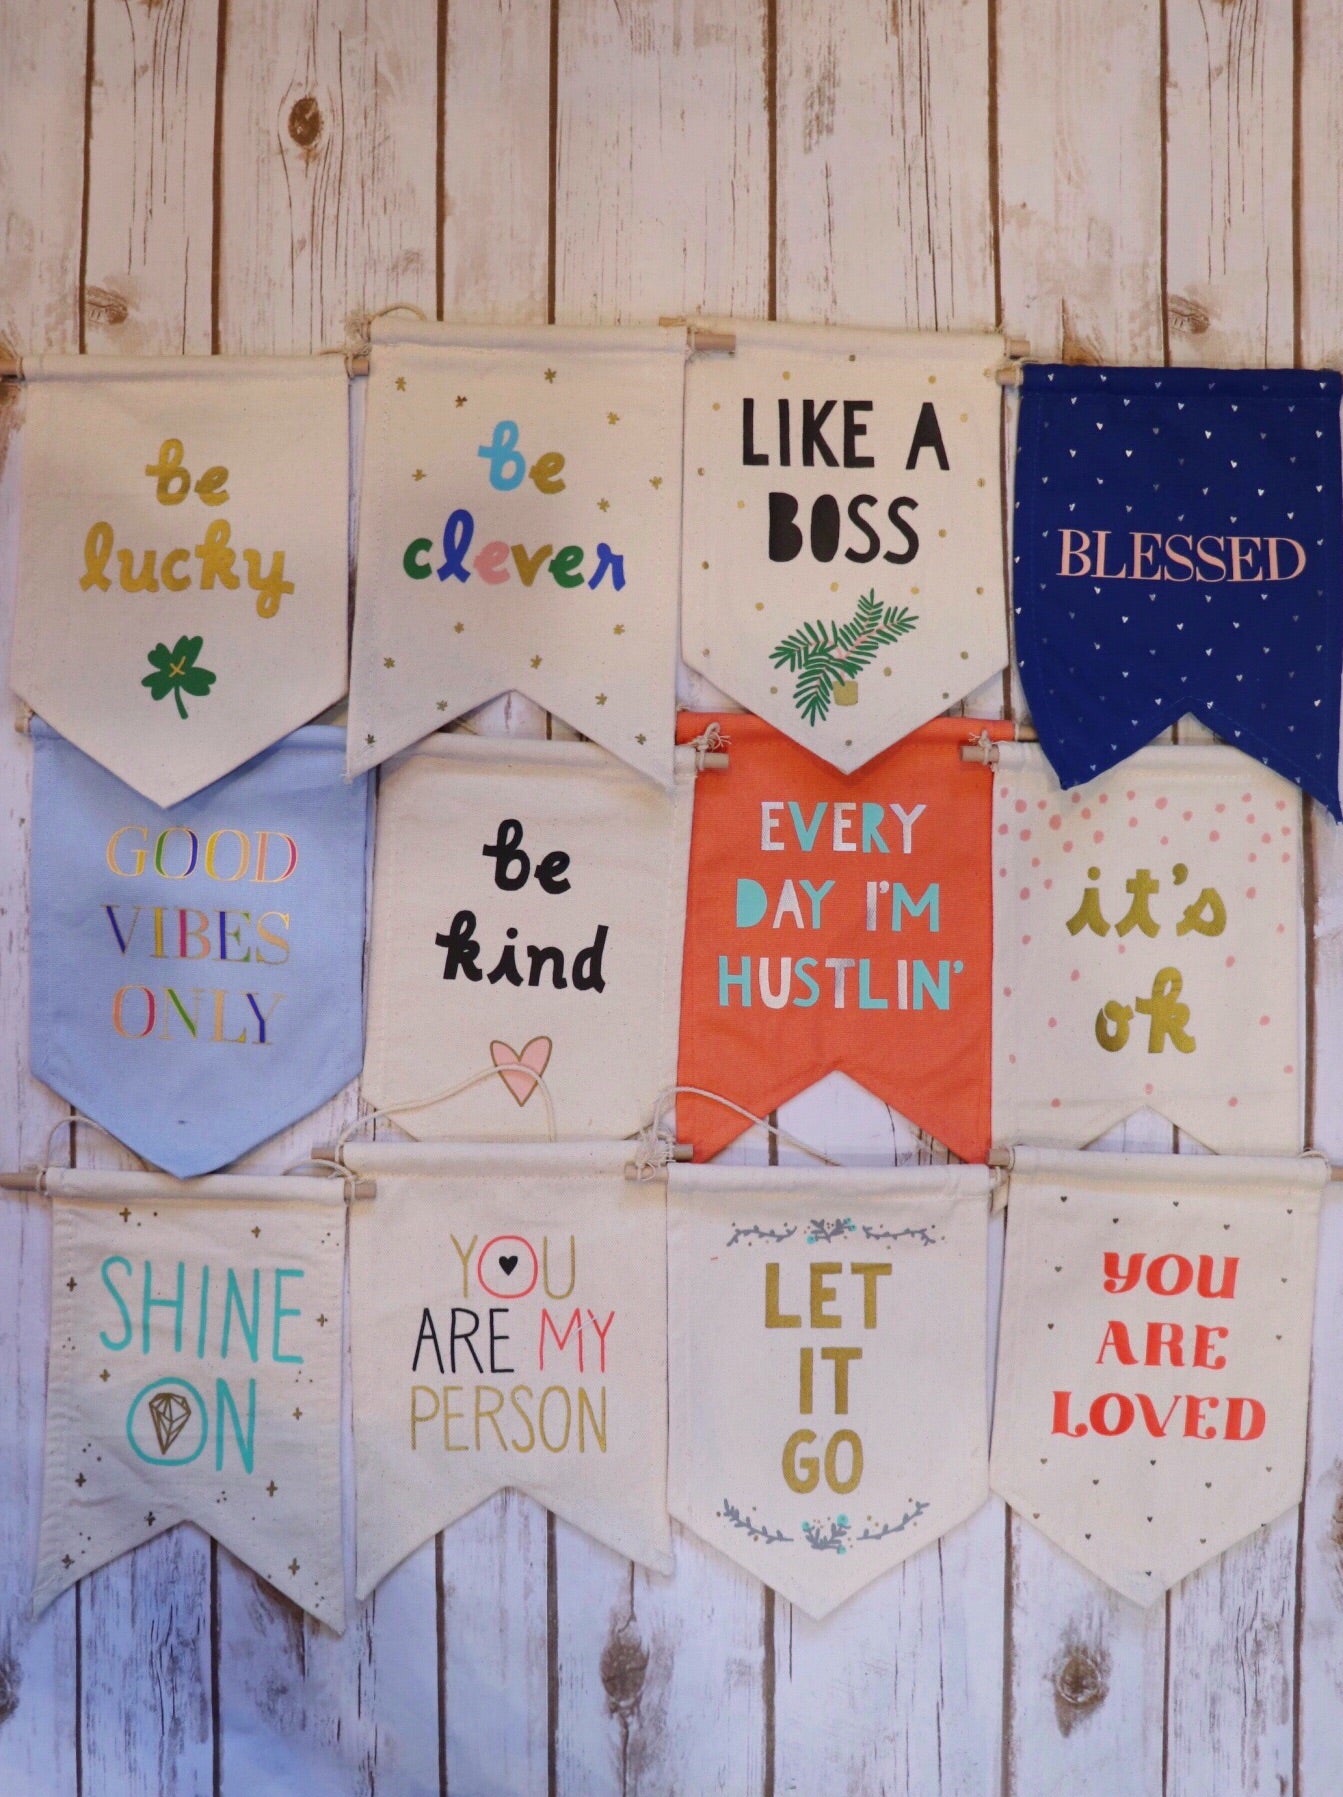 Affirmation Banners